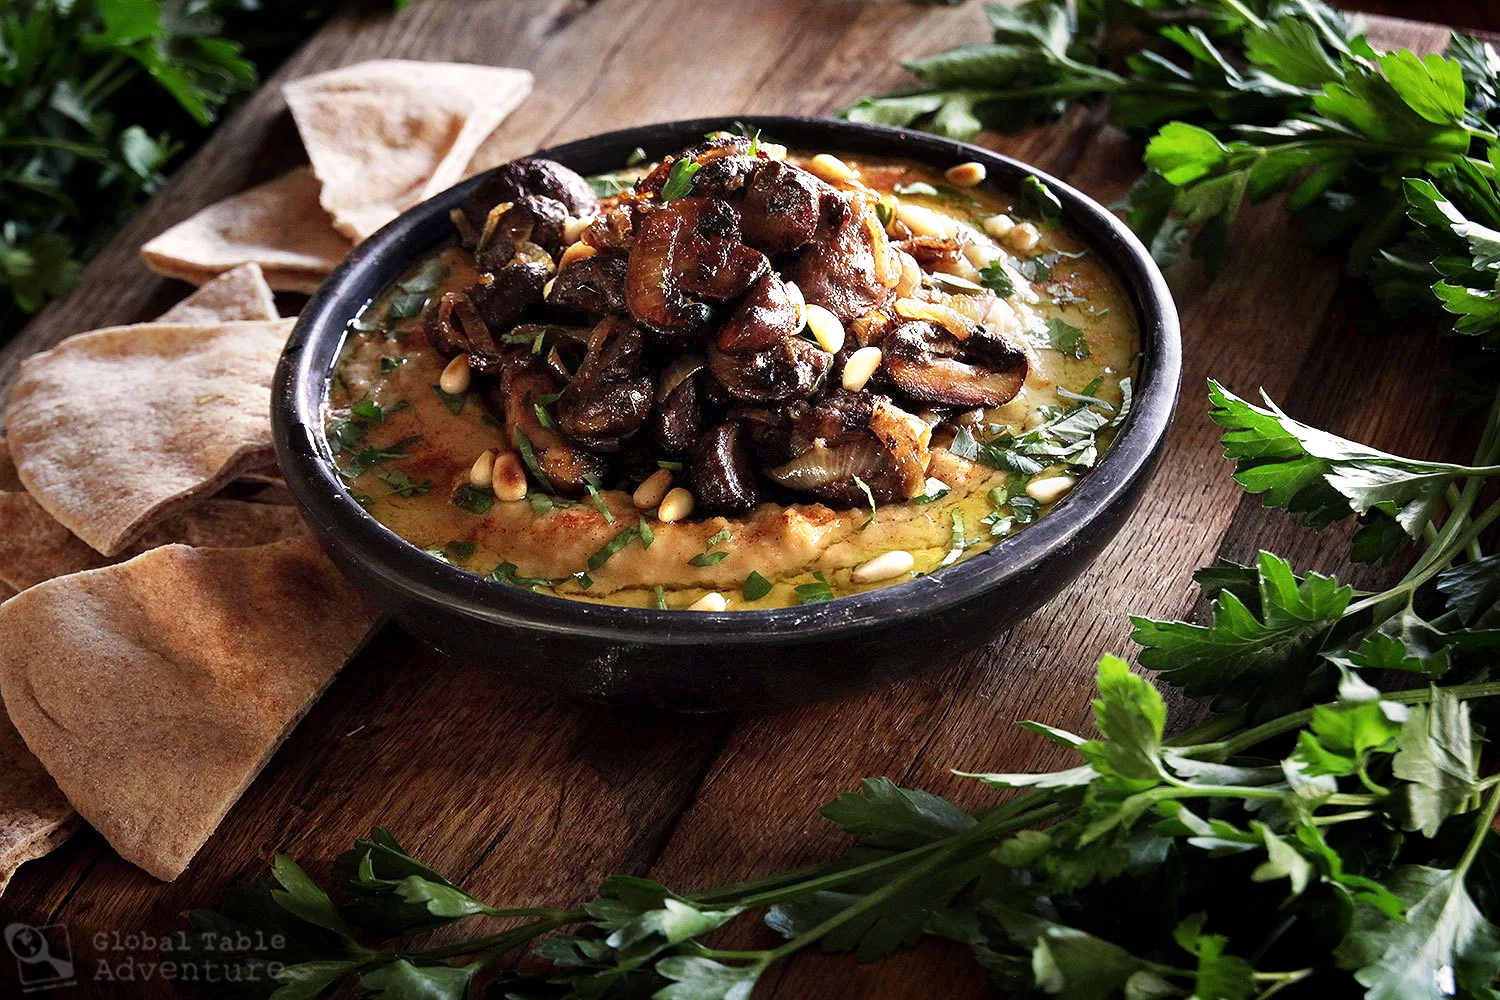 Recipe for hot hummus with caramelized onion and mushroom